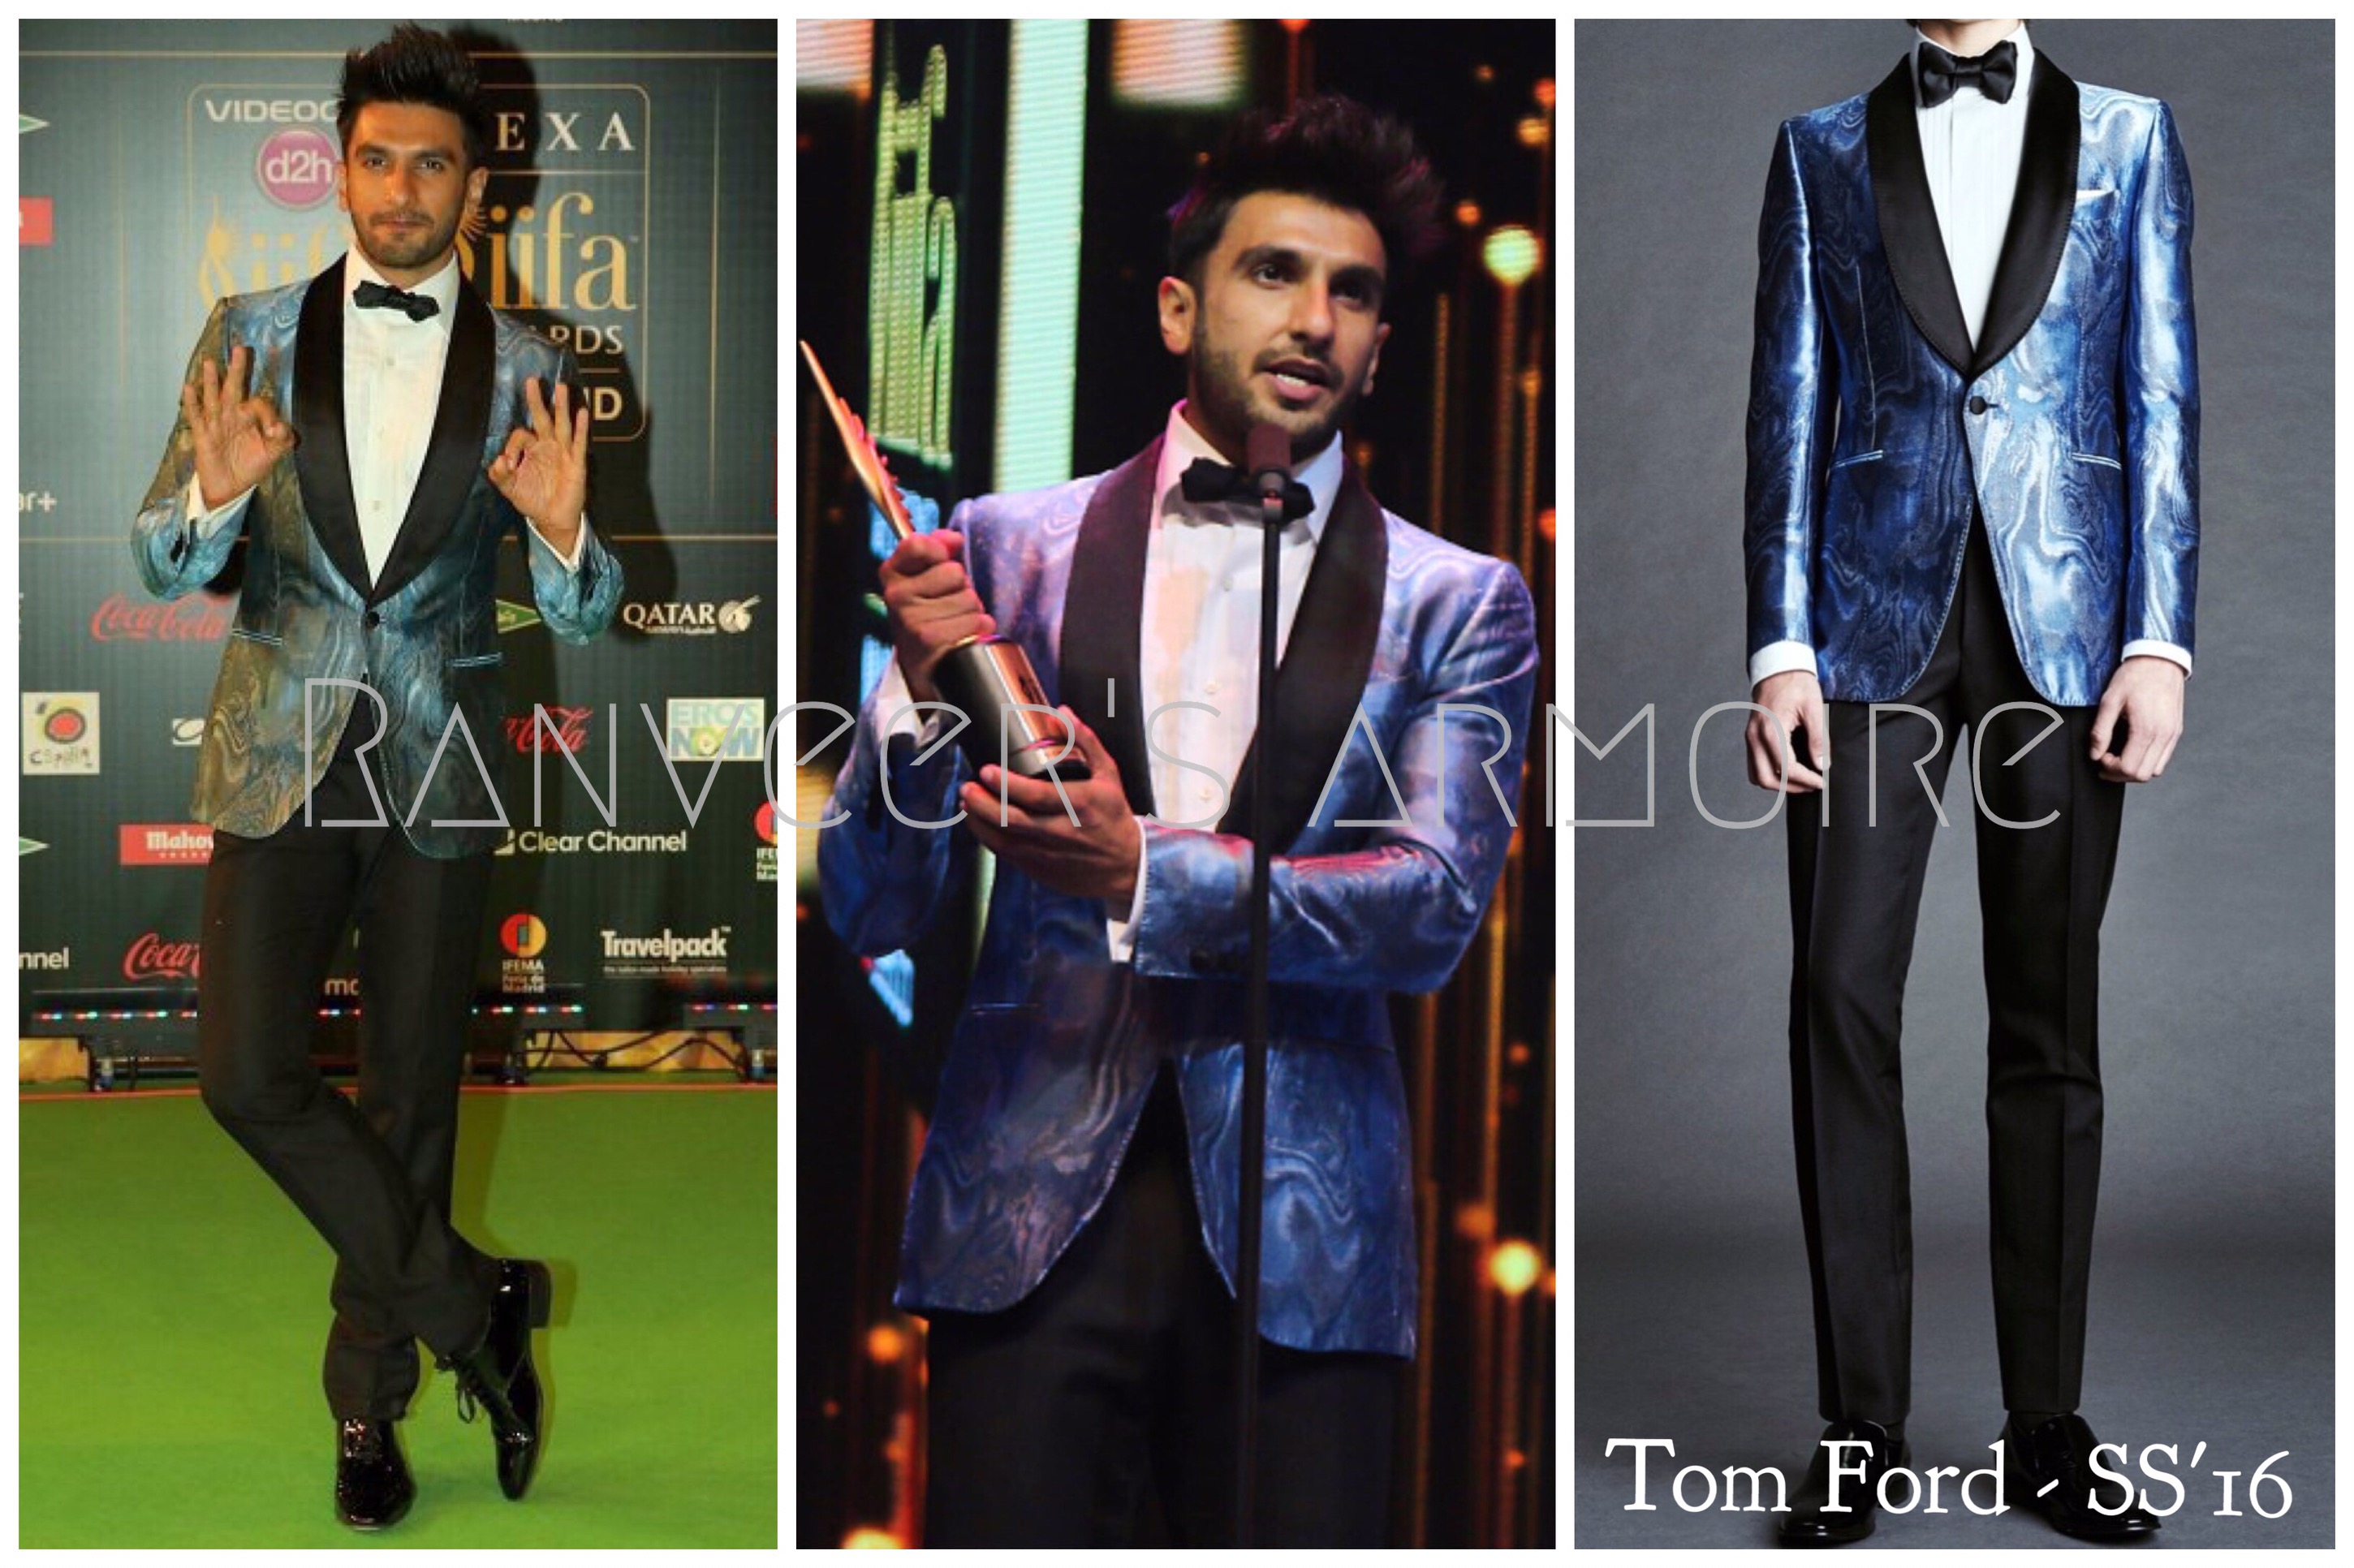 Ranveer Singh charms everyone with his suave look; suits up for a